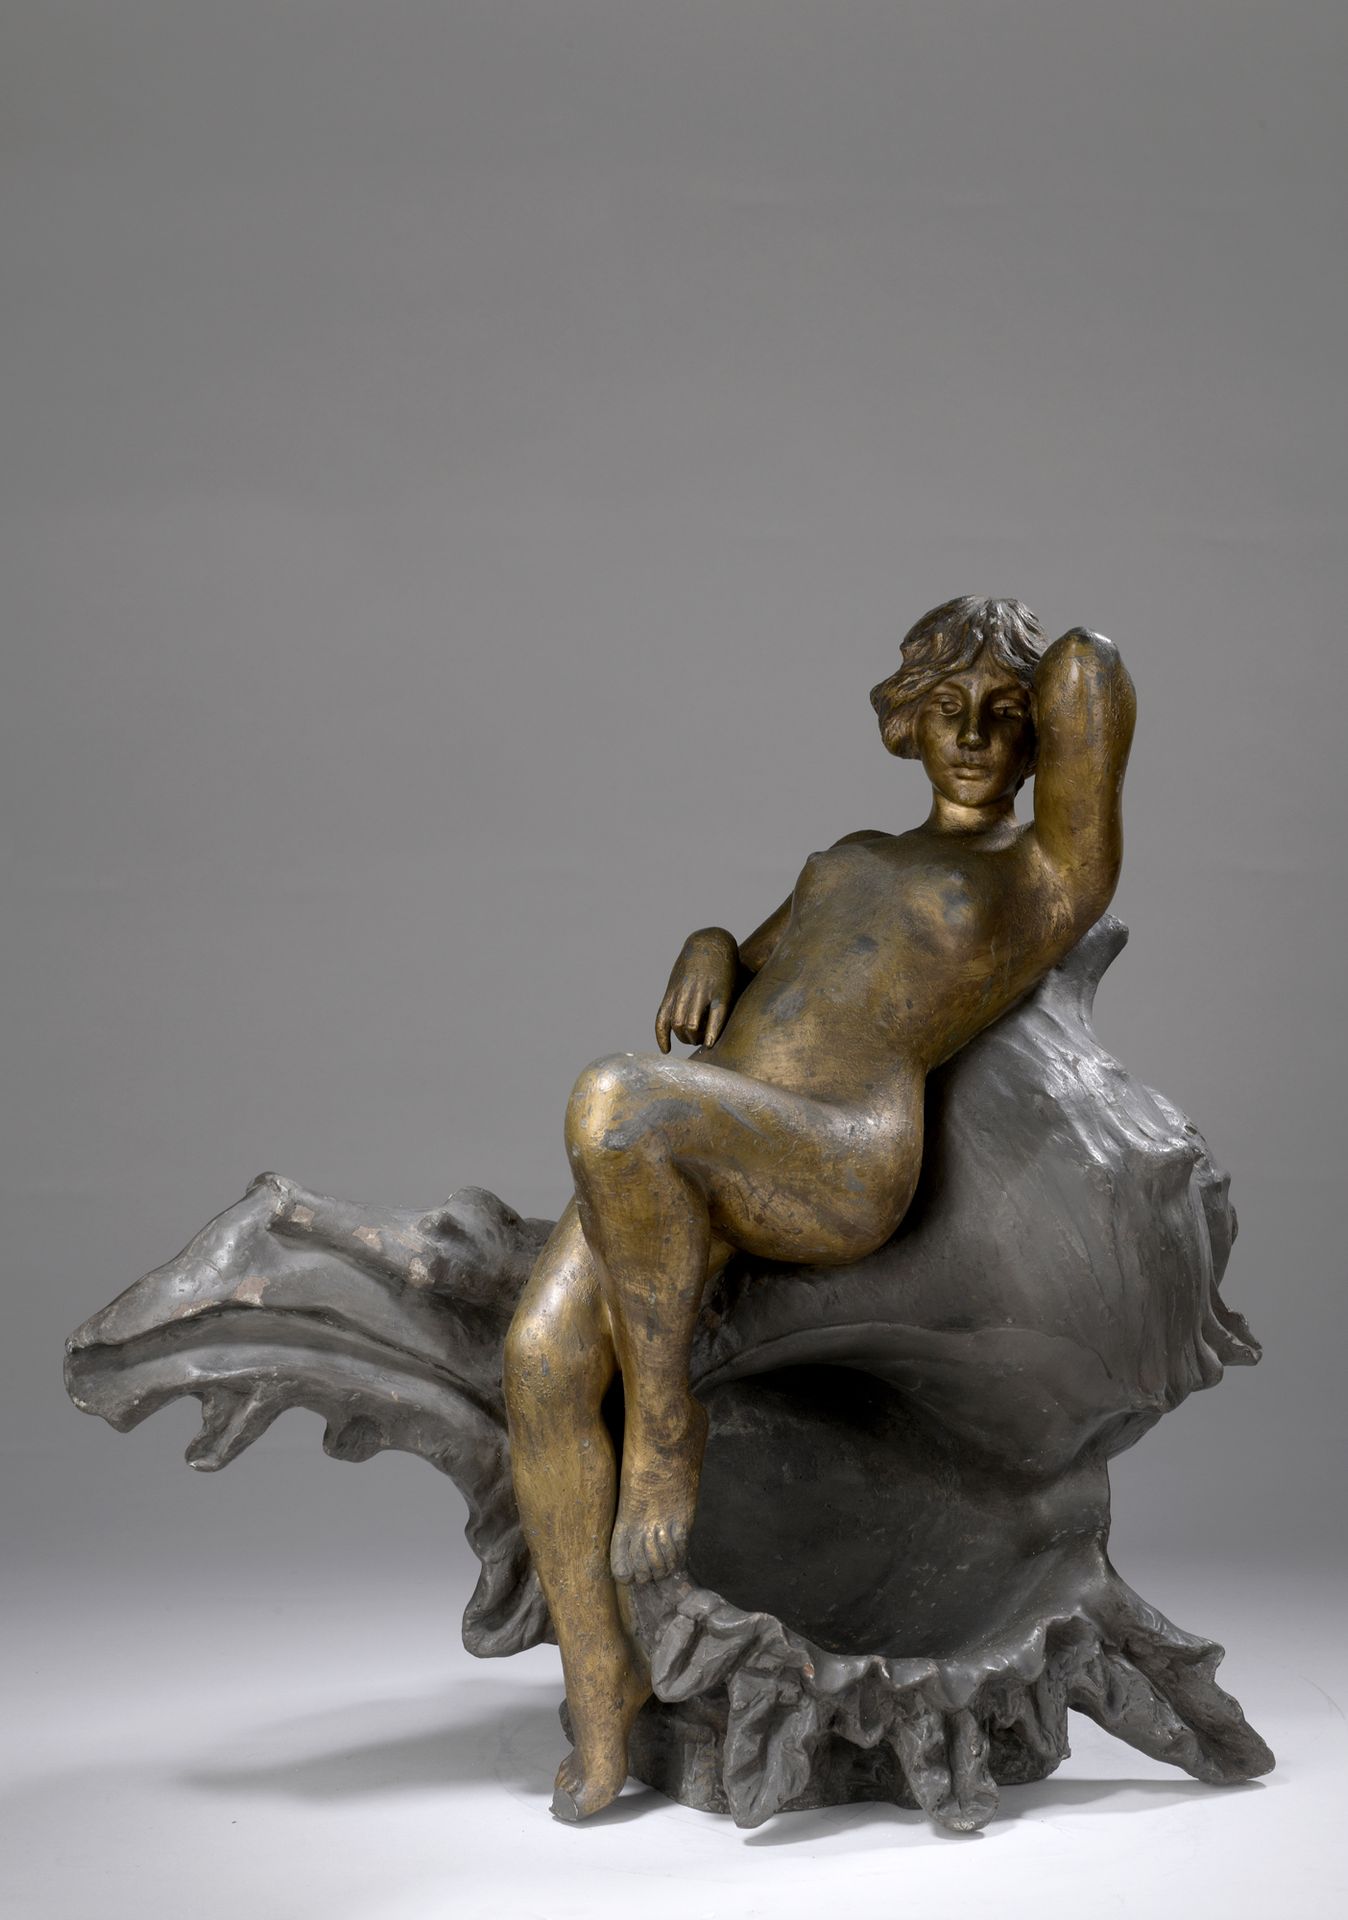 Null Emmanuel Villanis (1880-1920) 

Nude

Cast pewter with pewter and gilt pati&hellip;